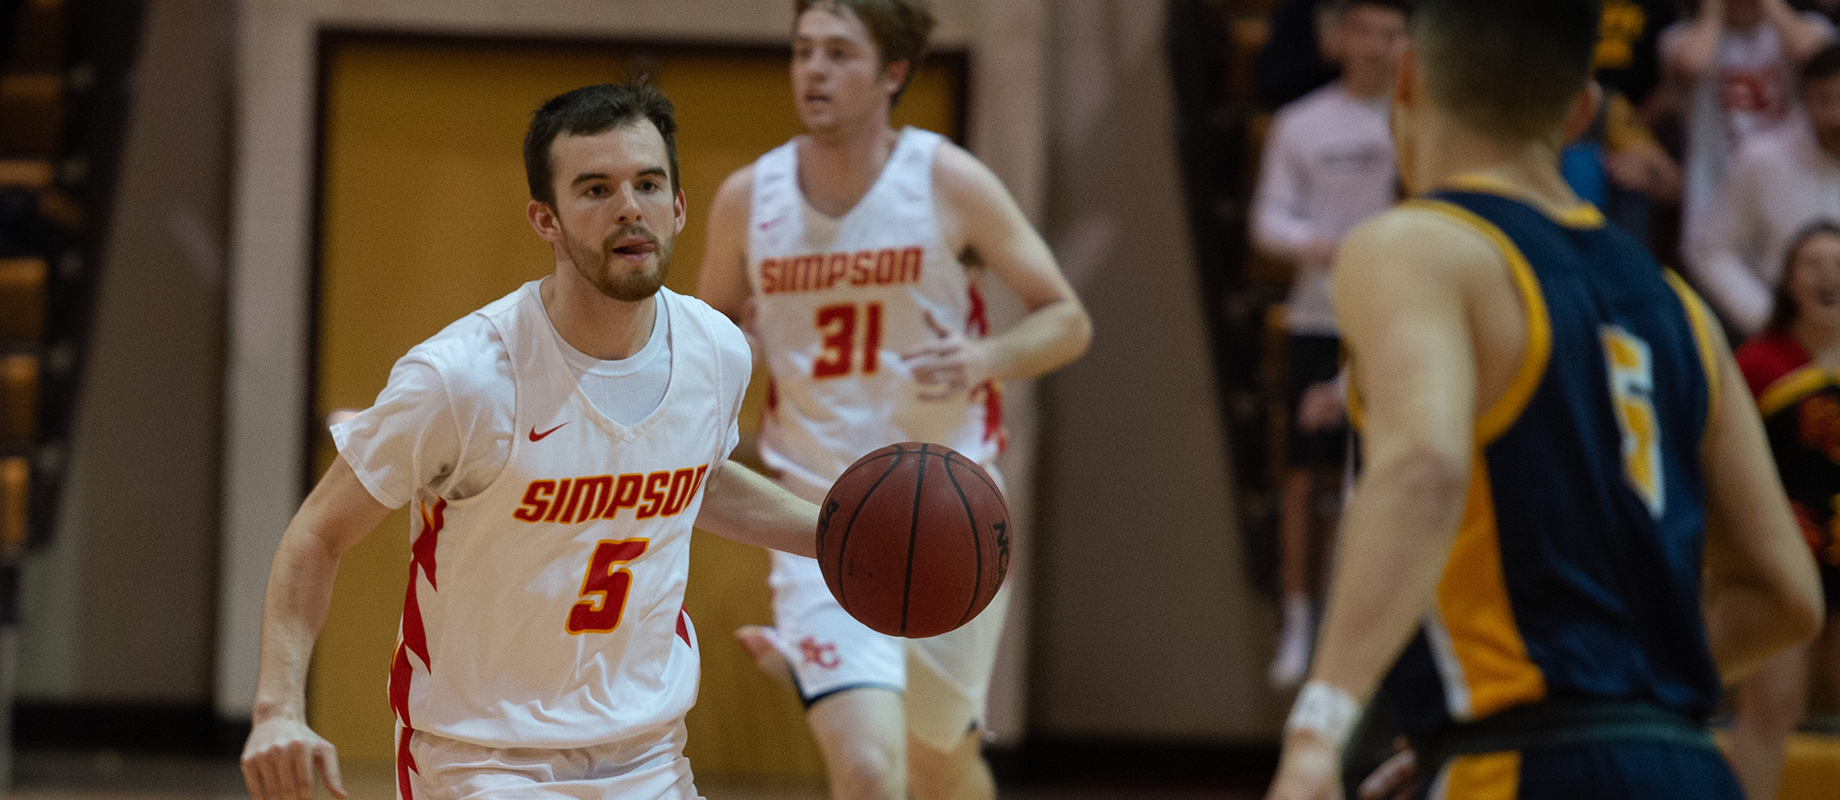 Nick Janssen as a member of the Simpson College basketball team.